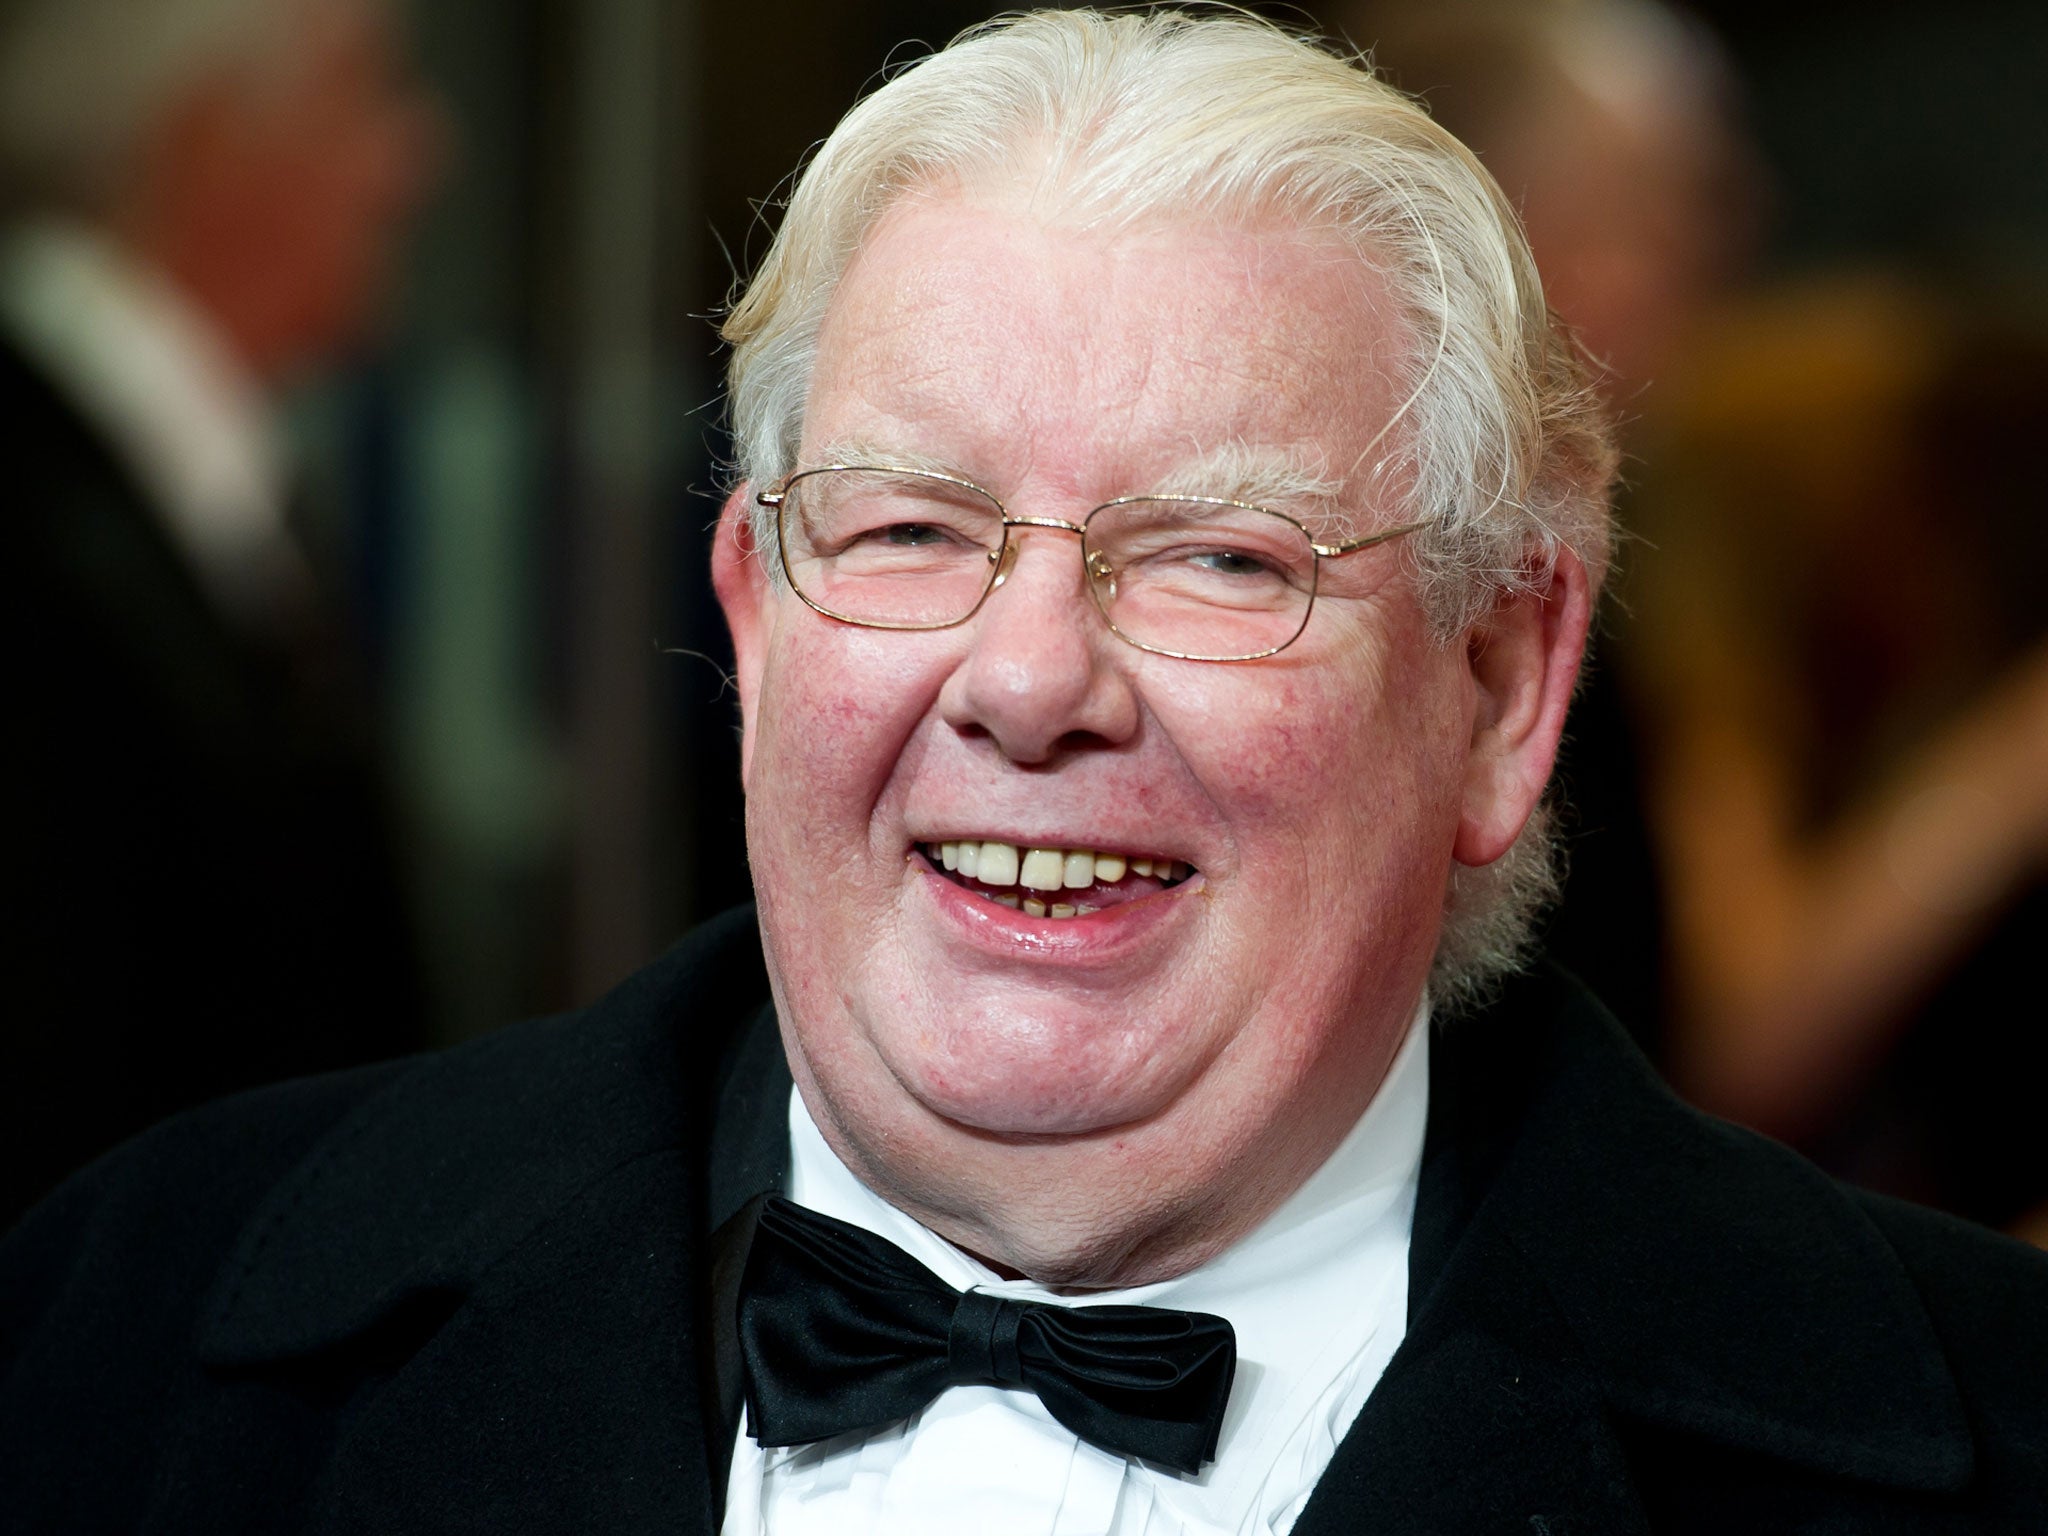 The actor Richard Griffiths has died, aged 65